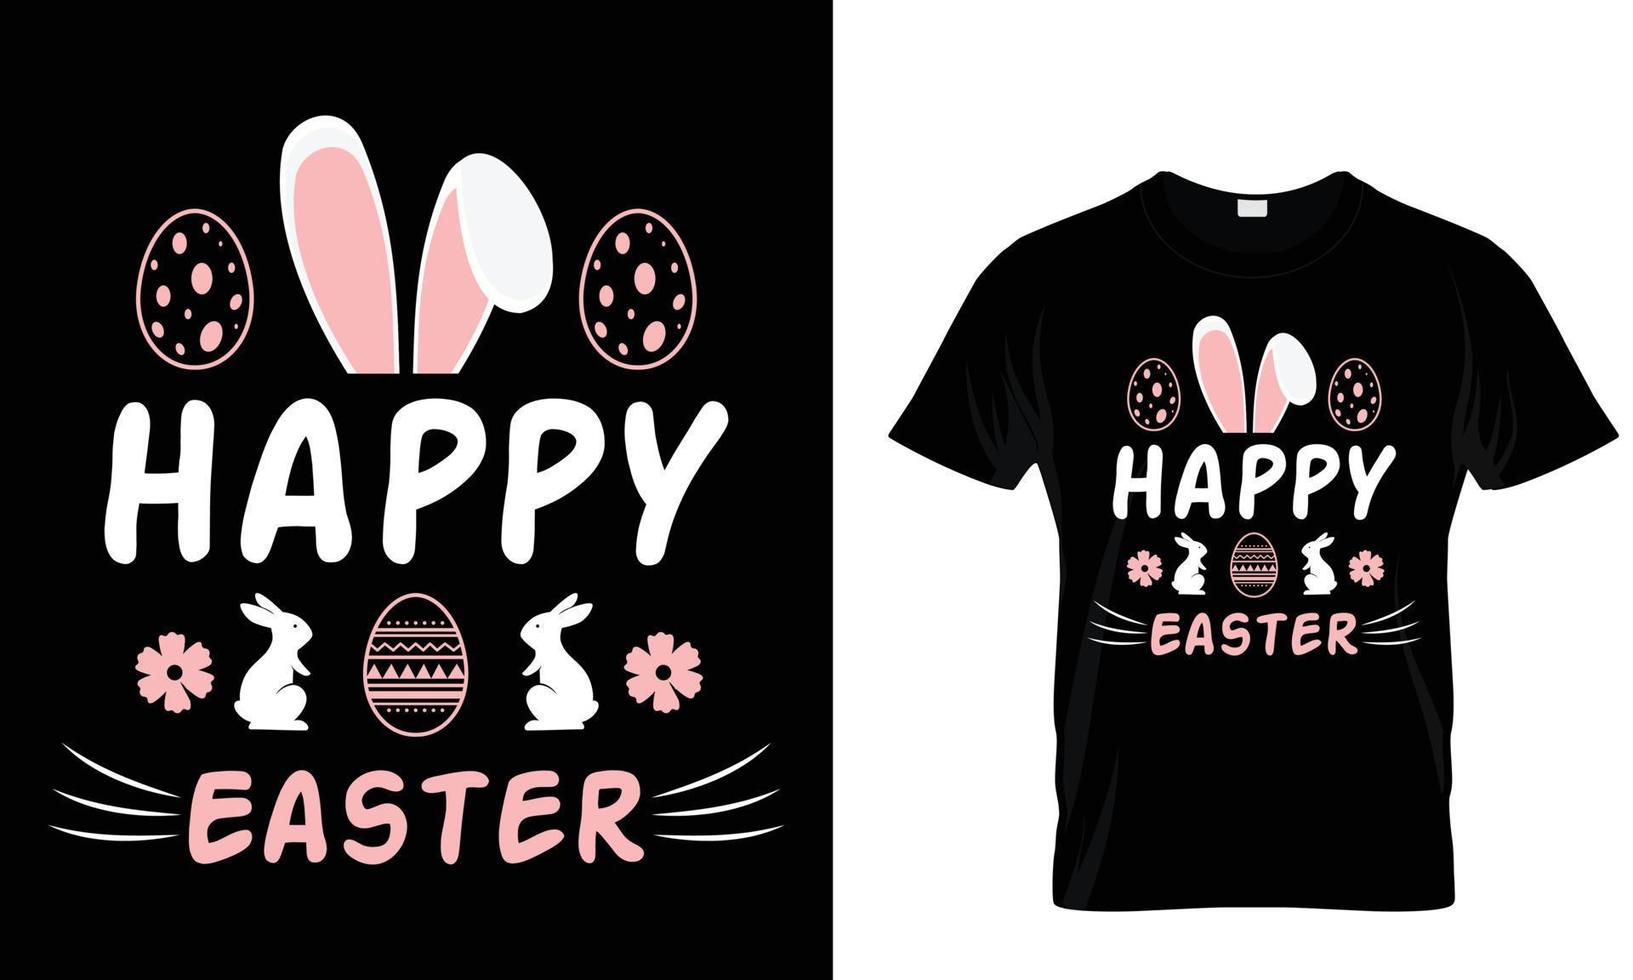 Happy easter funny t shirt design template .easy to print.funny Easter day all purpose t shirt for man and women vector